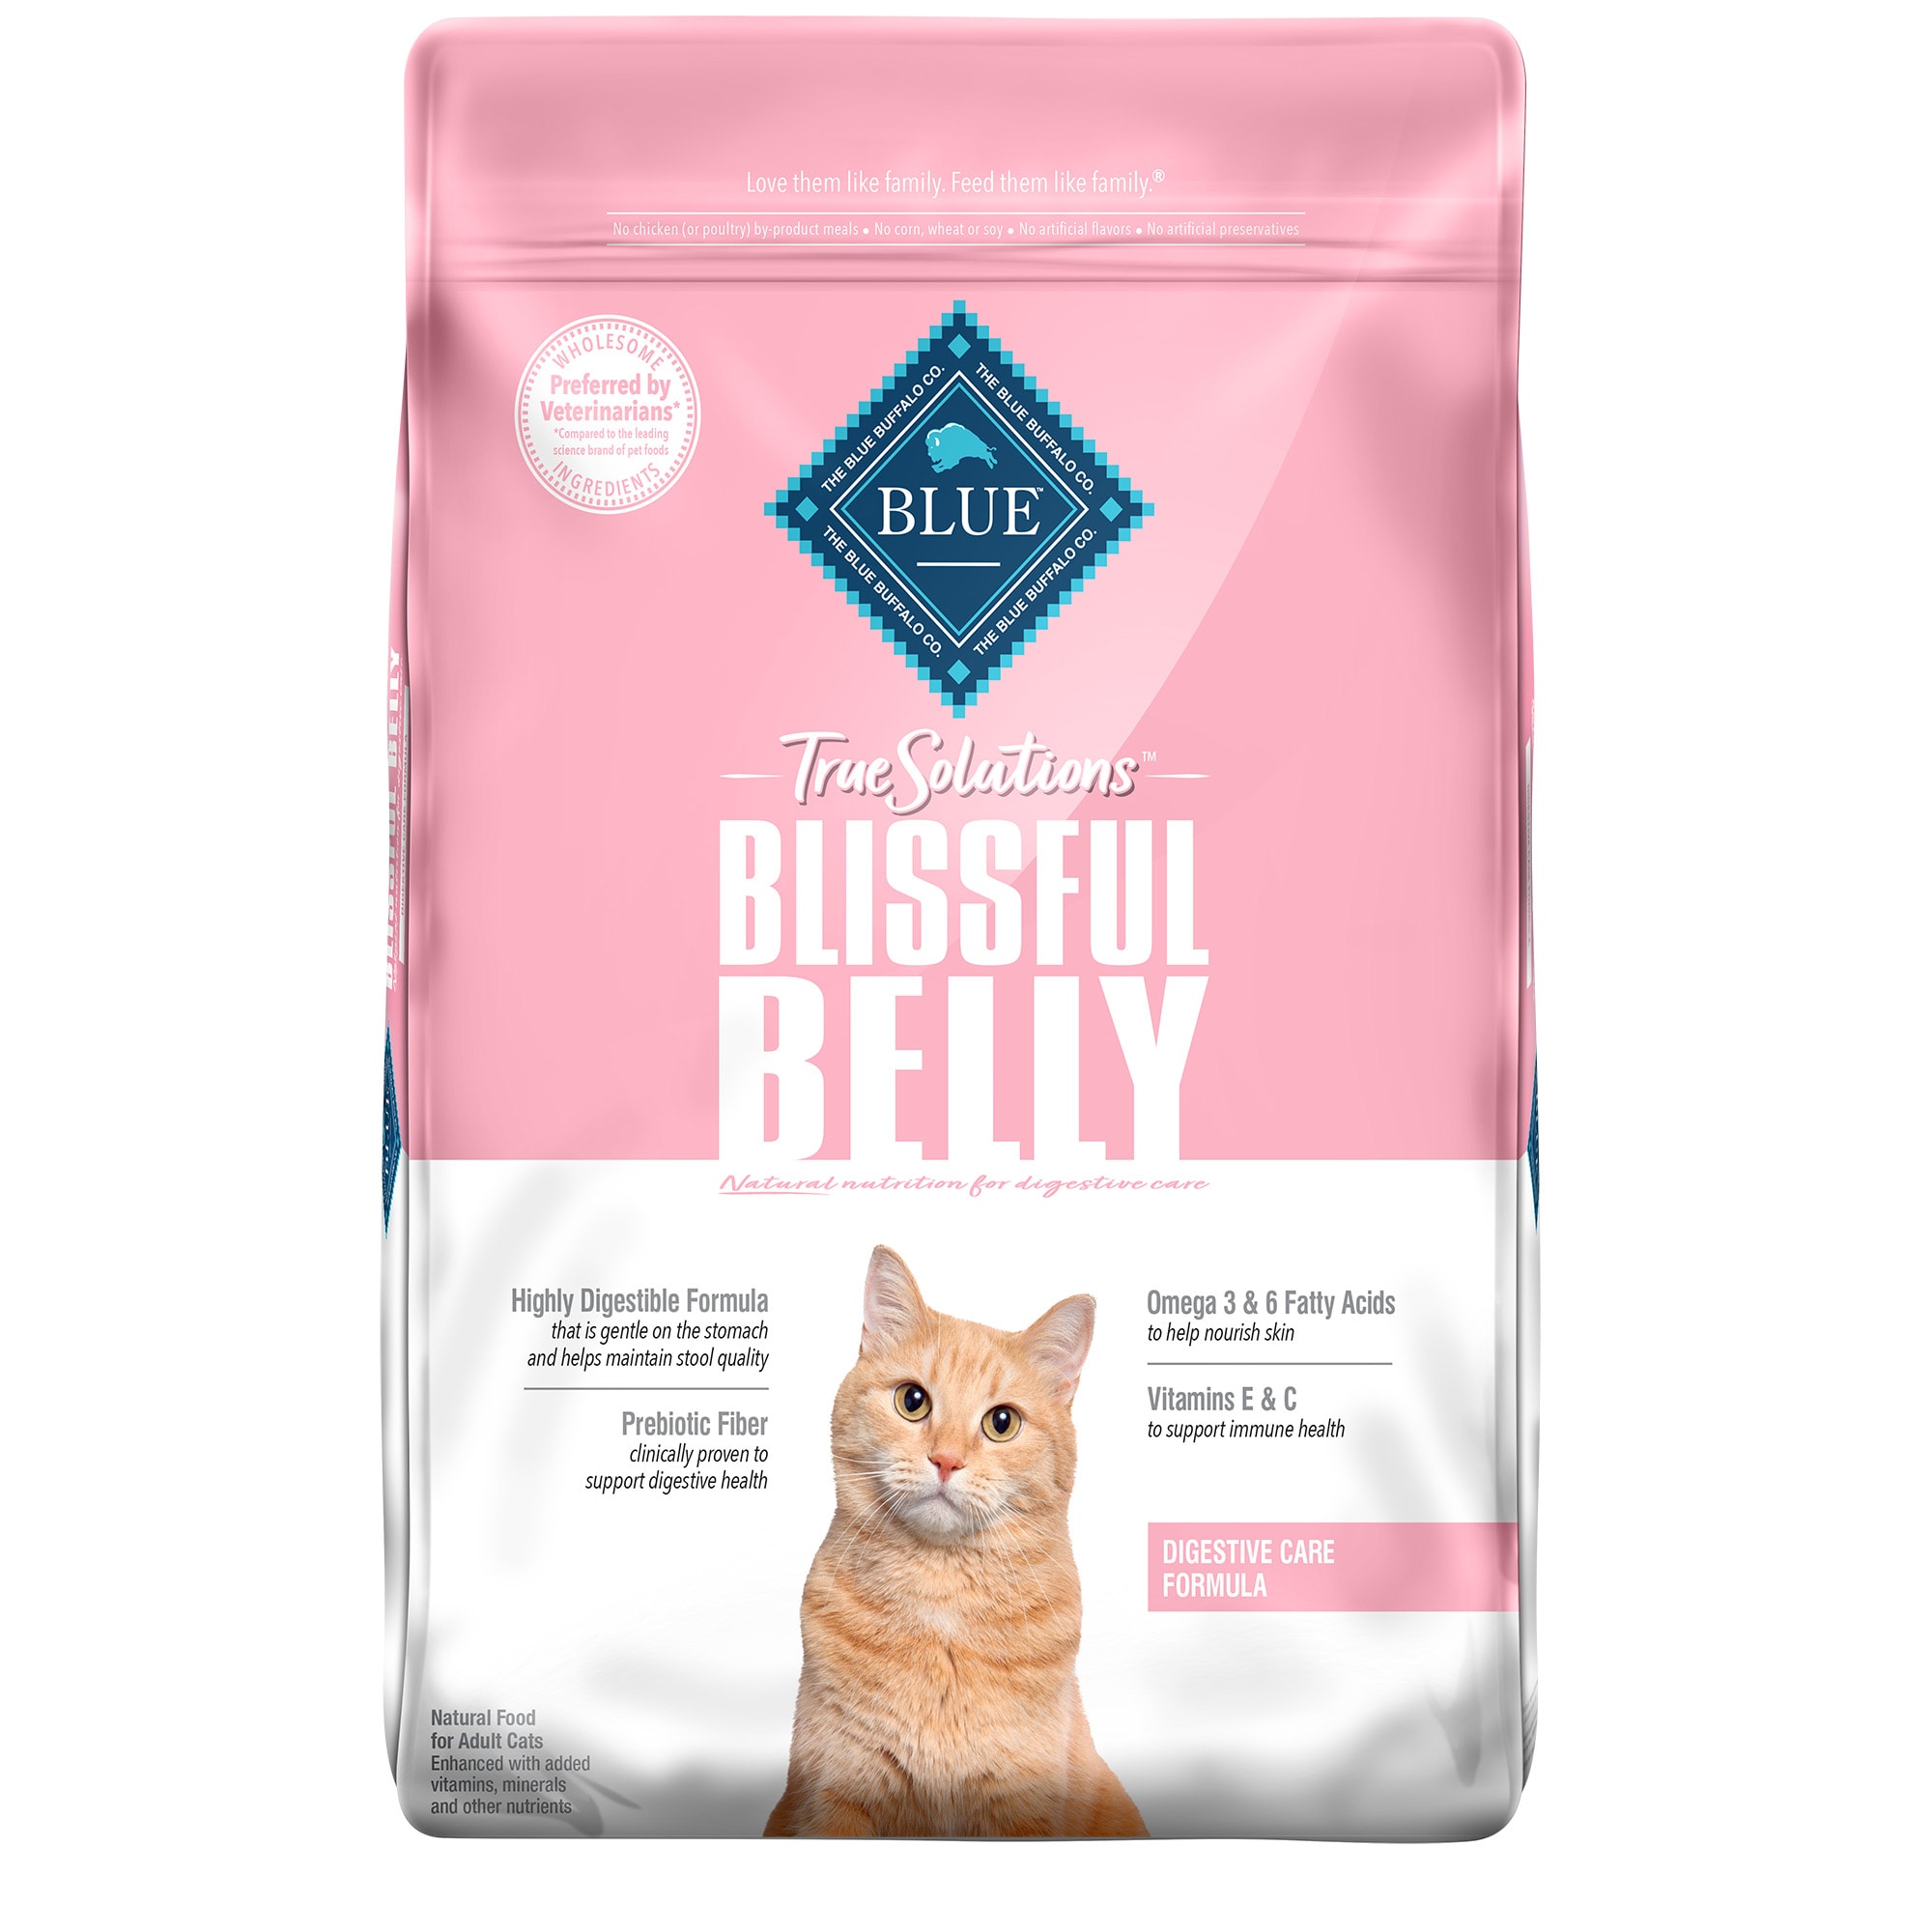 Blue Buffalo Natural Veterinary Cat Food (Dry) Review And Analysis